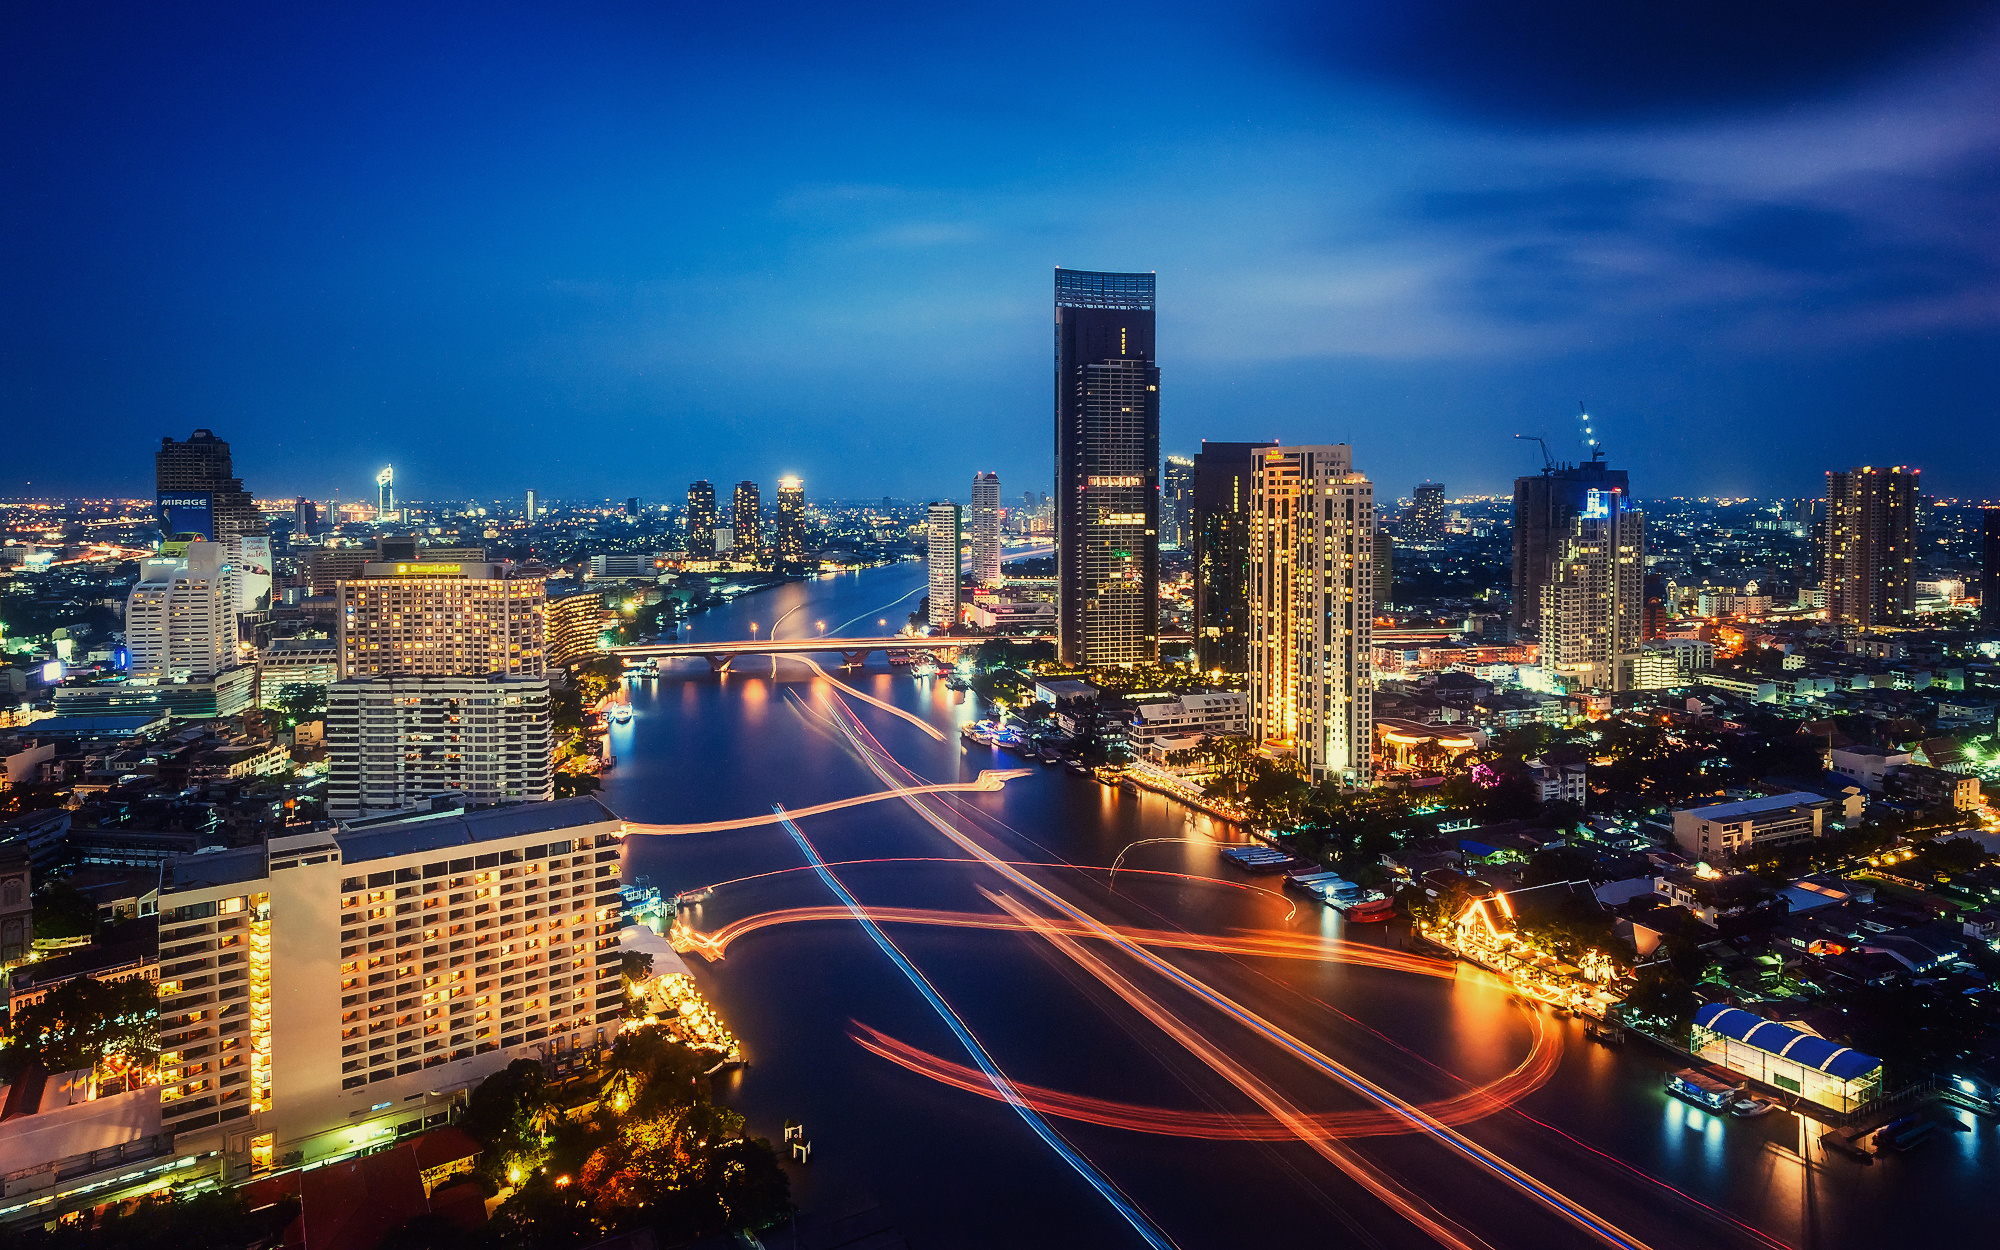 chao, Phraya, River, Bangkok, Thailand, World, Architecture, Cities, Buildings, Skyscrapers, Timelapse, Vehicles, Boats, Night, Lights, Color, Sky, Clouds, Hdr Wallpaper